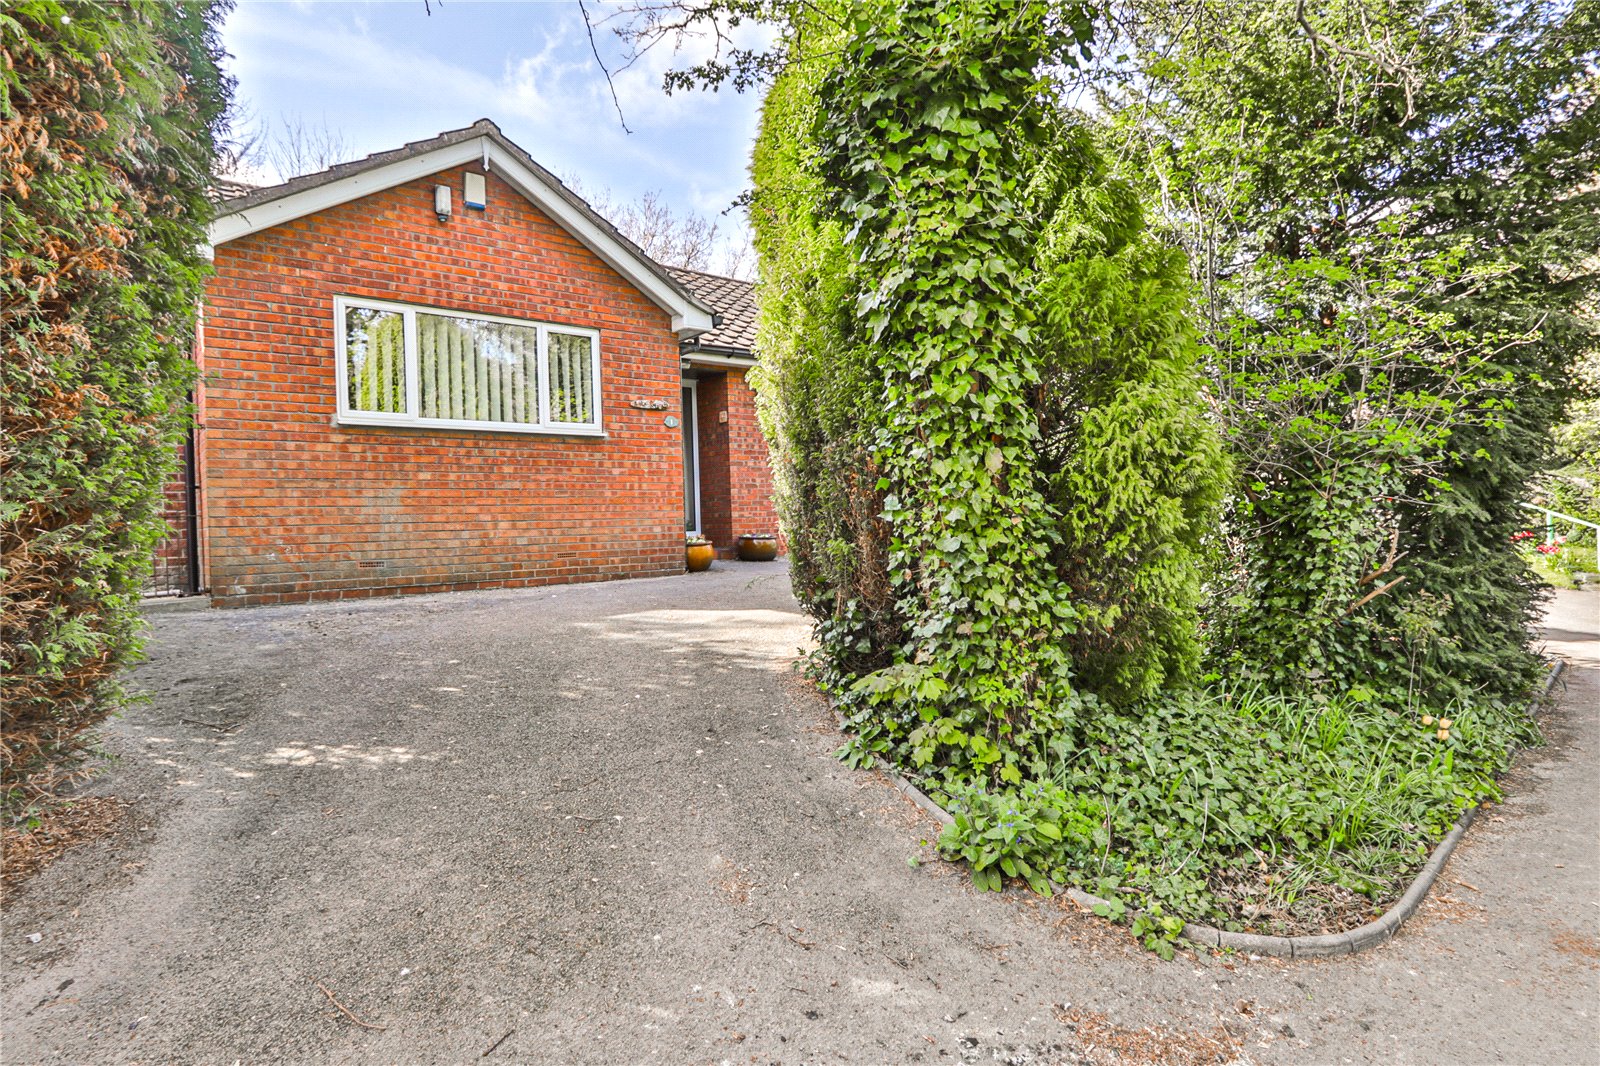 3 bed bungalow for sale in Park Walk, Church Street - Property Image 1